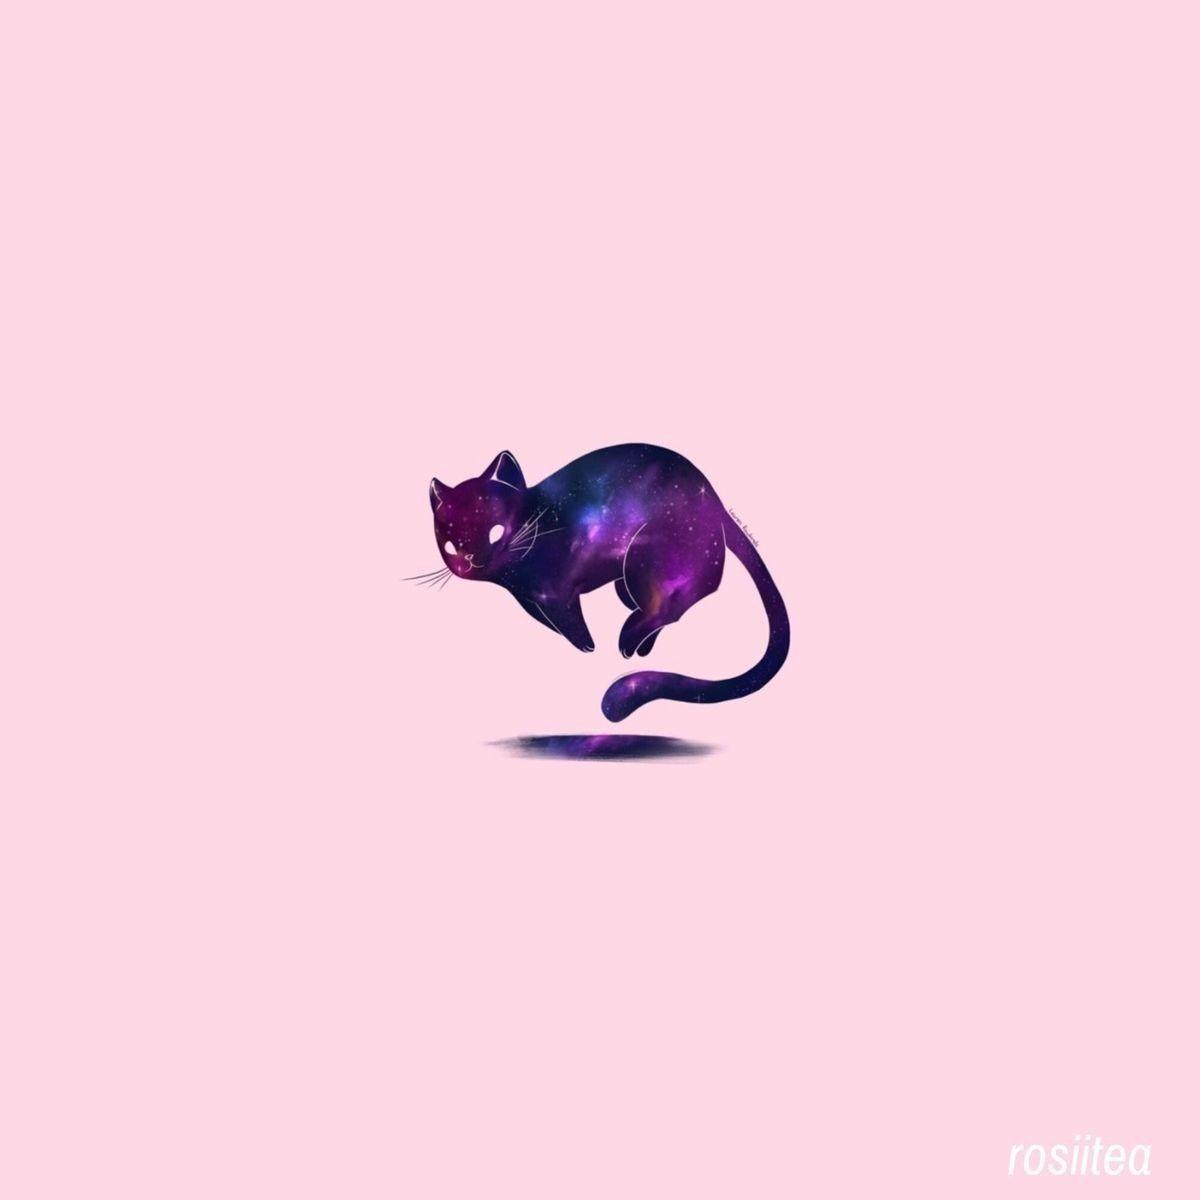 A simple, galaxy cat on the center of the wallpaper. Galaxy cat